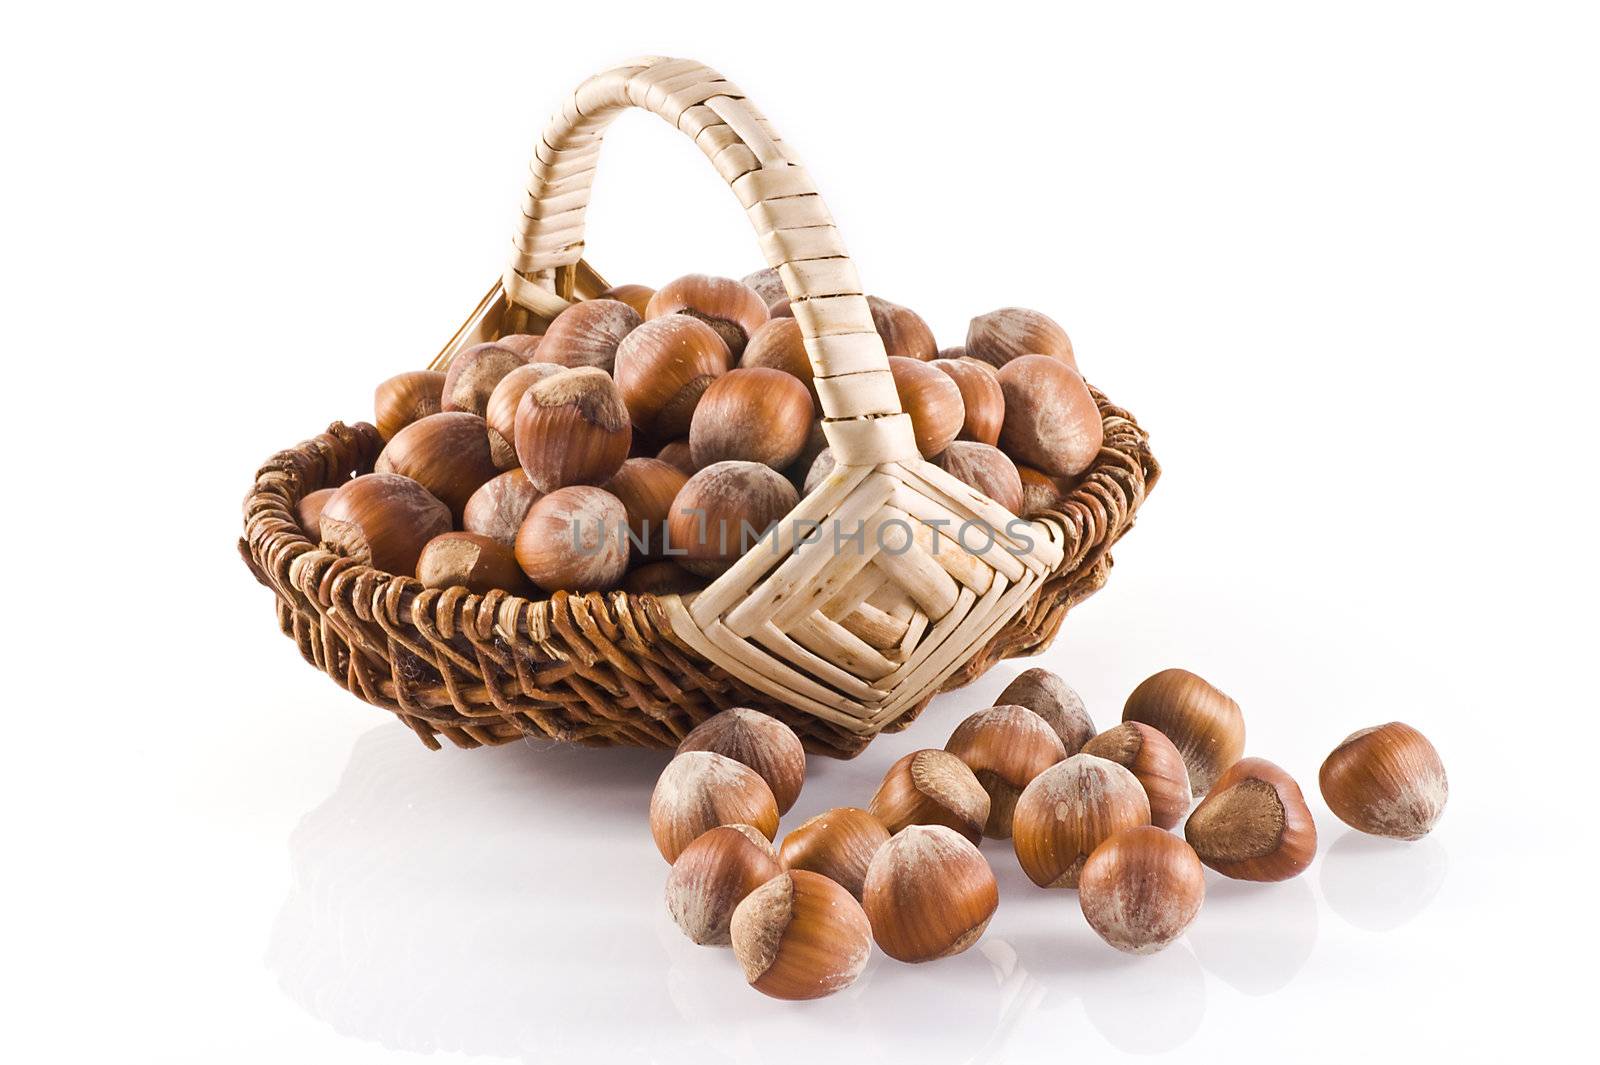 Little basket filled with hazelnuts on a white background.